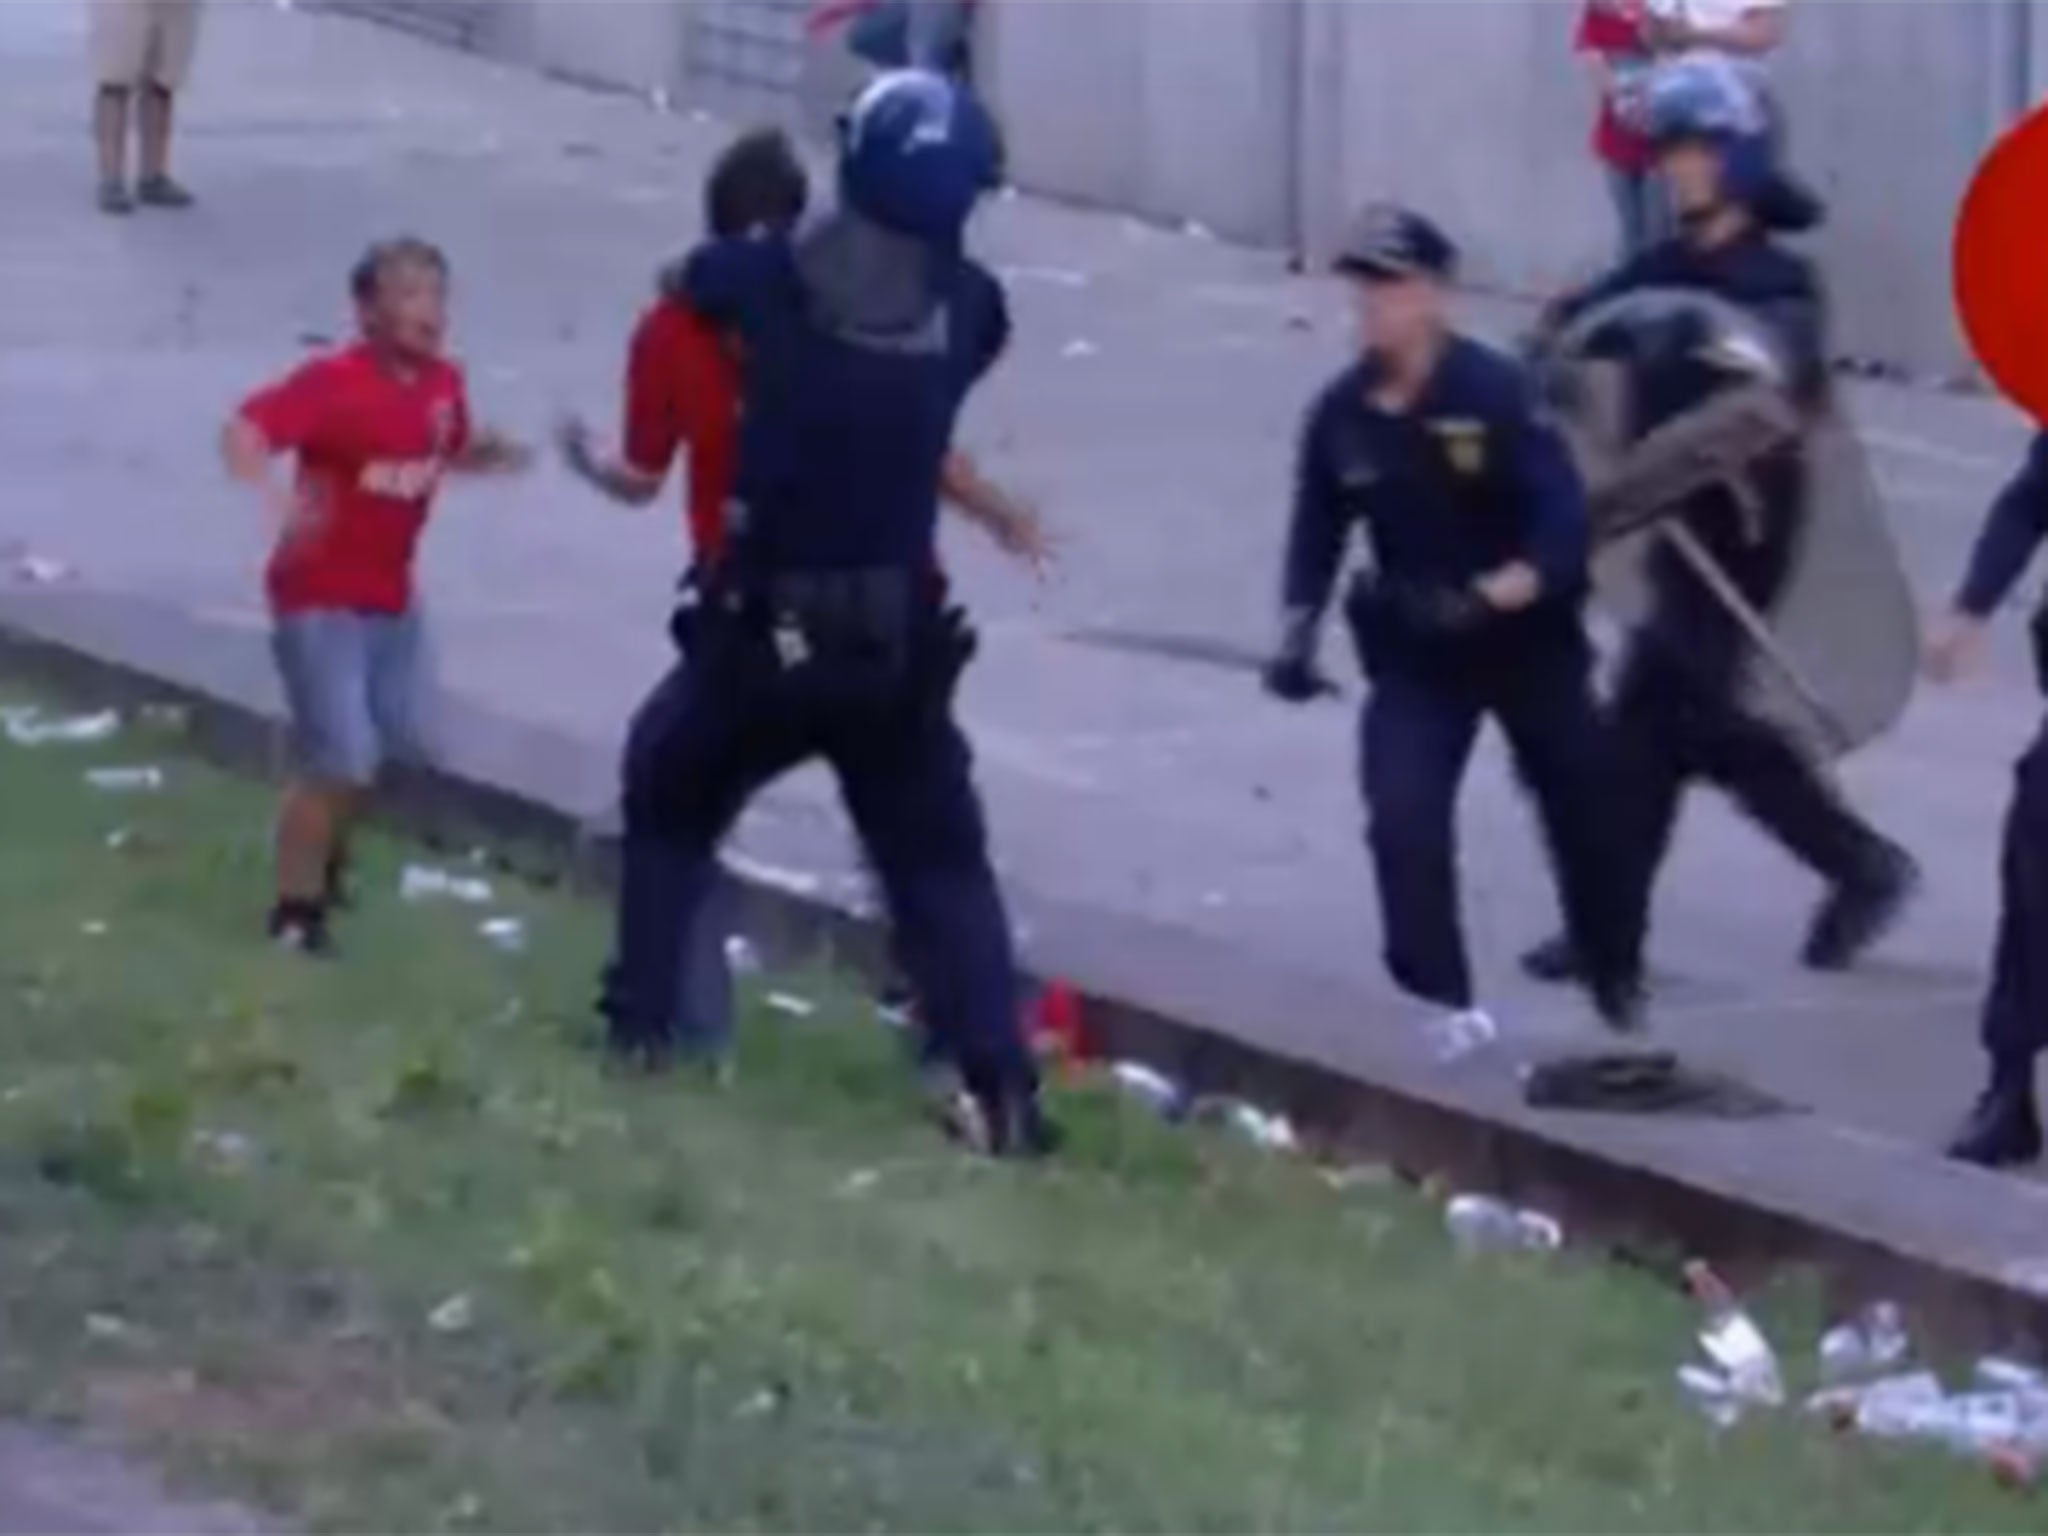 Police beat the father in front of his kids as he walked back from the the match that secured the Portuguese title for Benfica